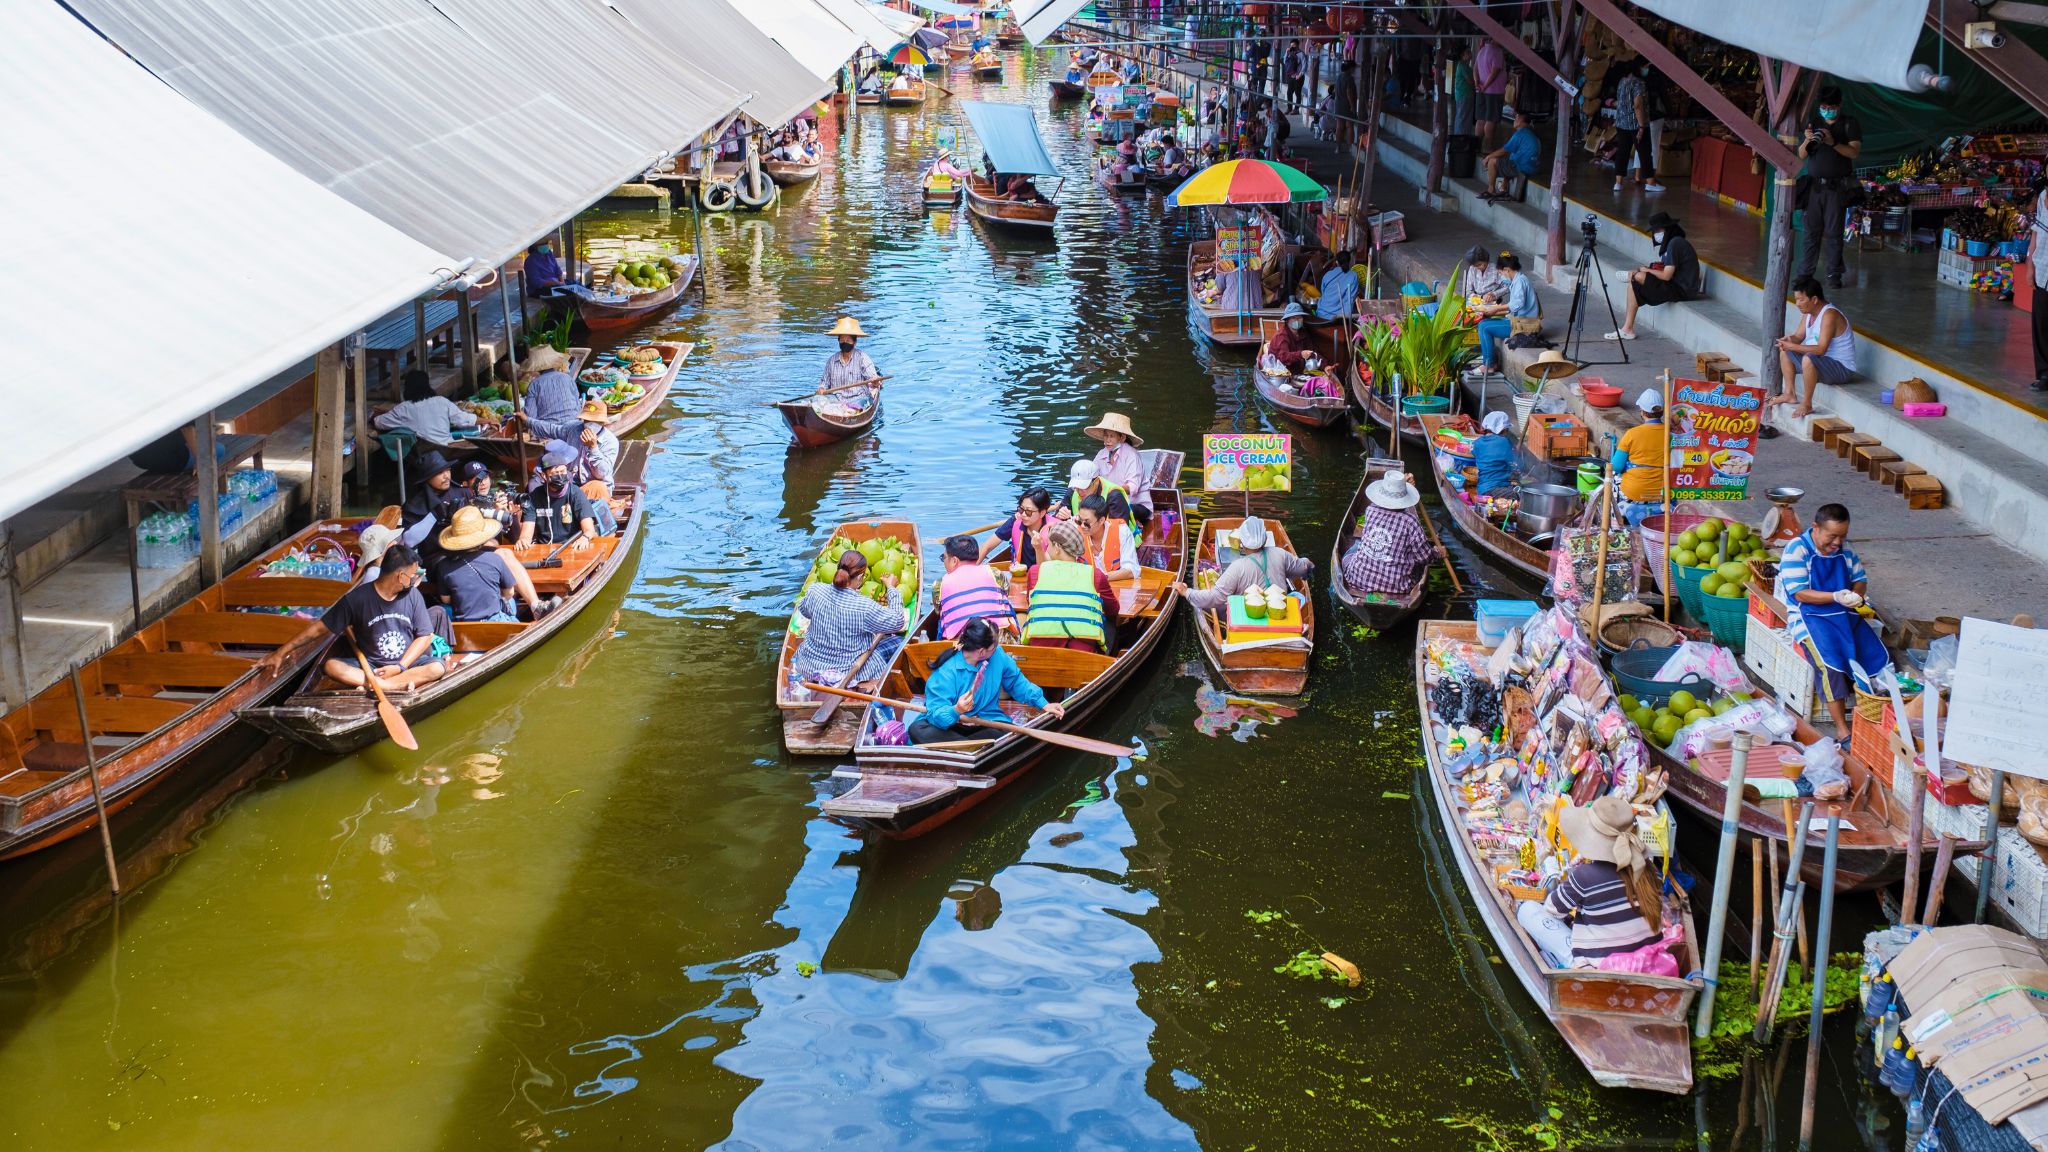 Day 3 Vibrant Colors And Lively Trade At Damnoen Saduak Floating Market